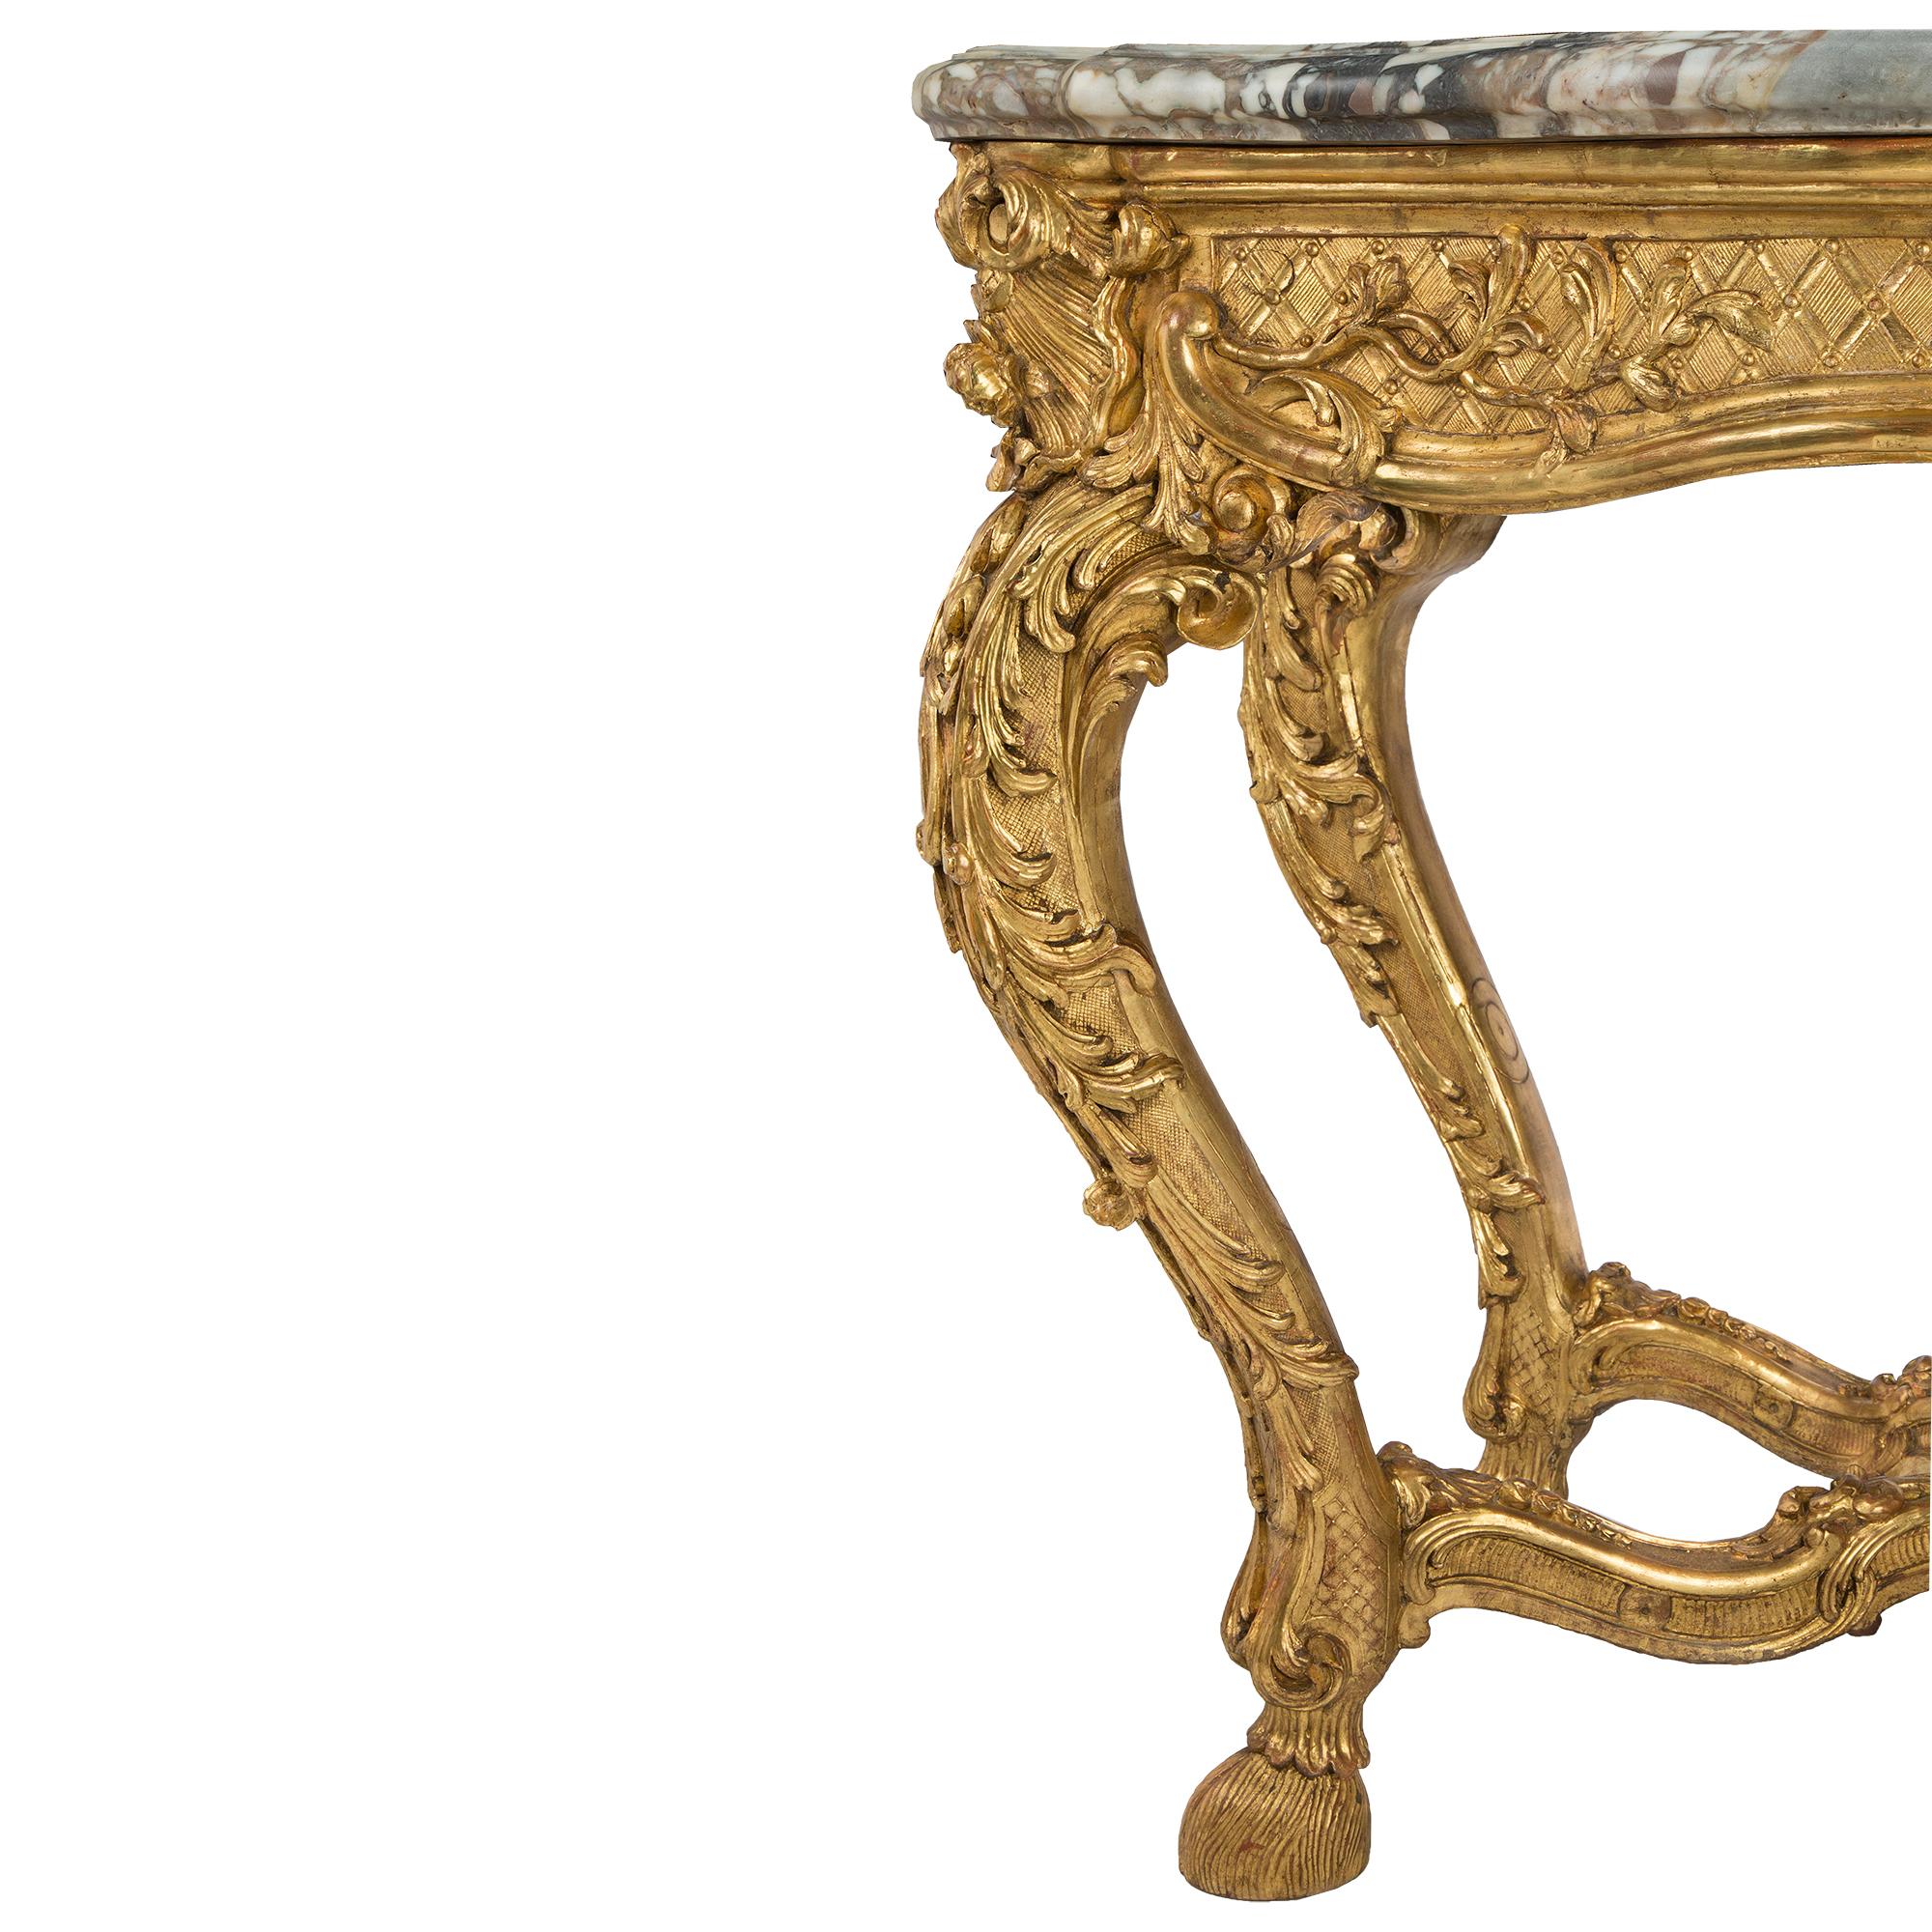 French 18th Century Regence Period Giltwood and Marble Freestanding Console For Sale 1